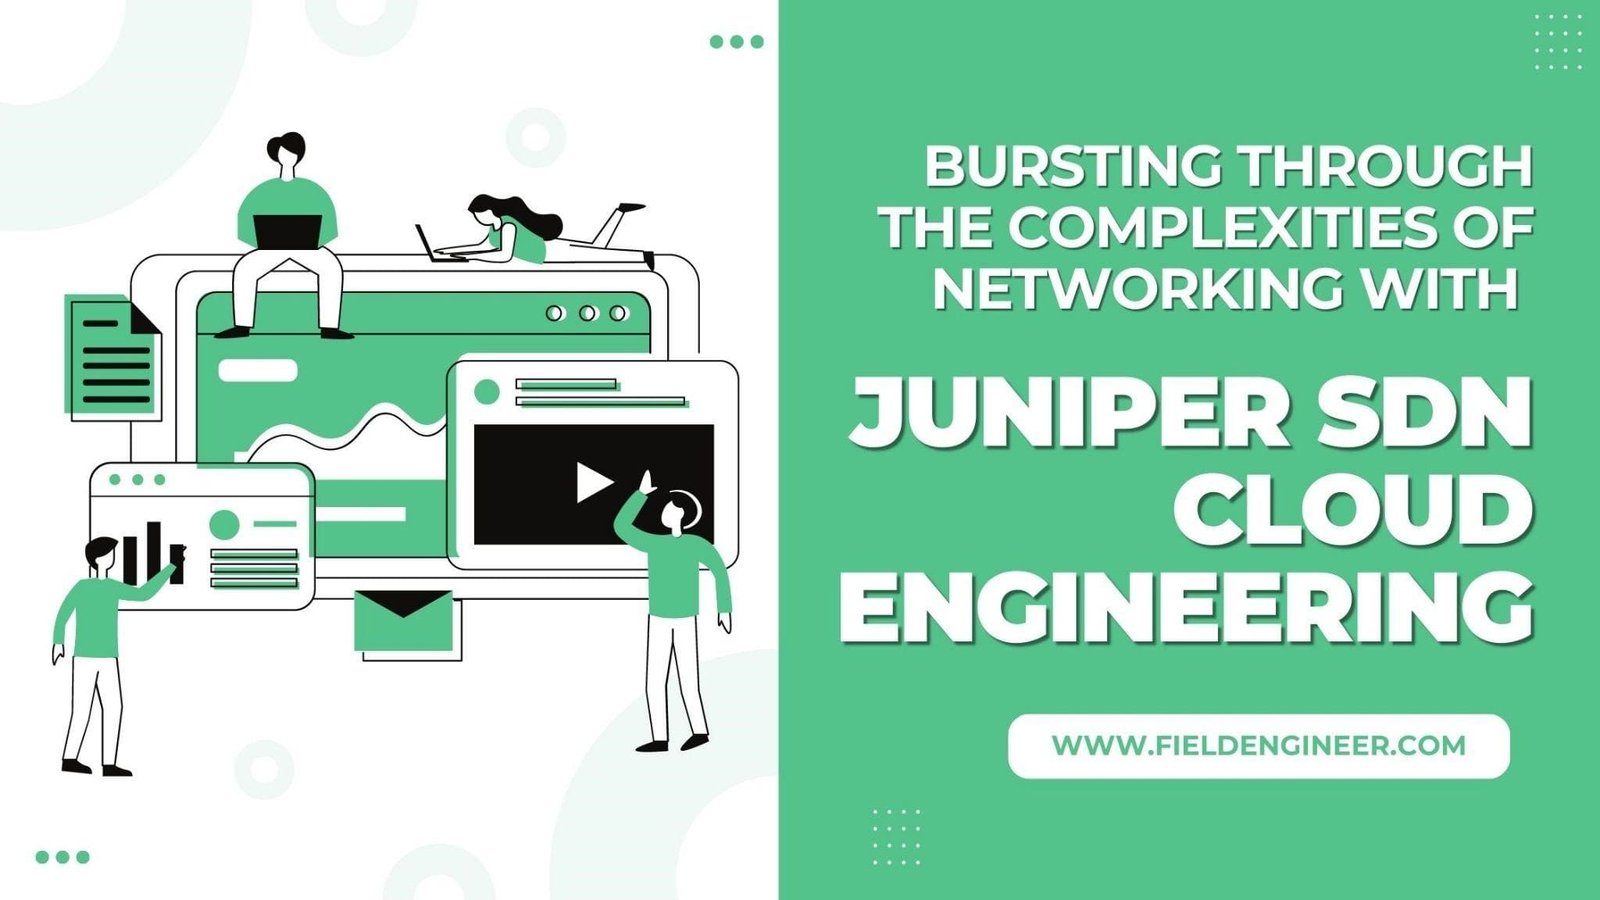 Bursting through the complexities of Networking with Juniper SDN Cloud Engineering